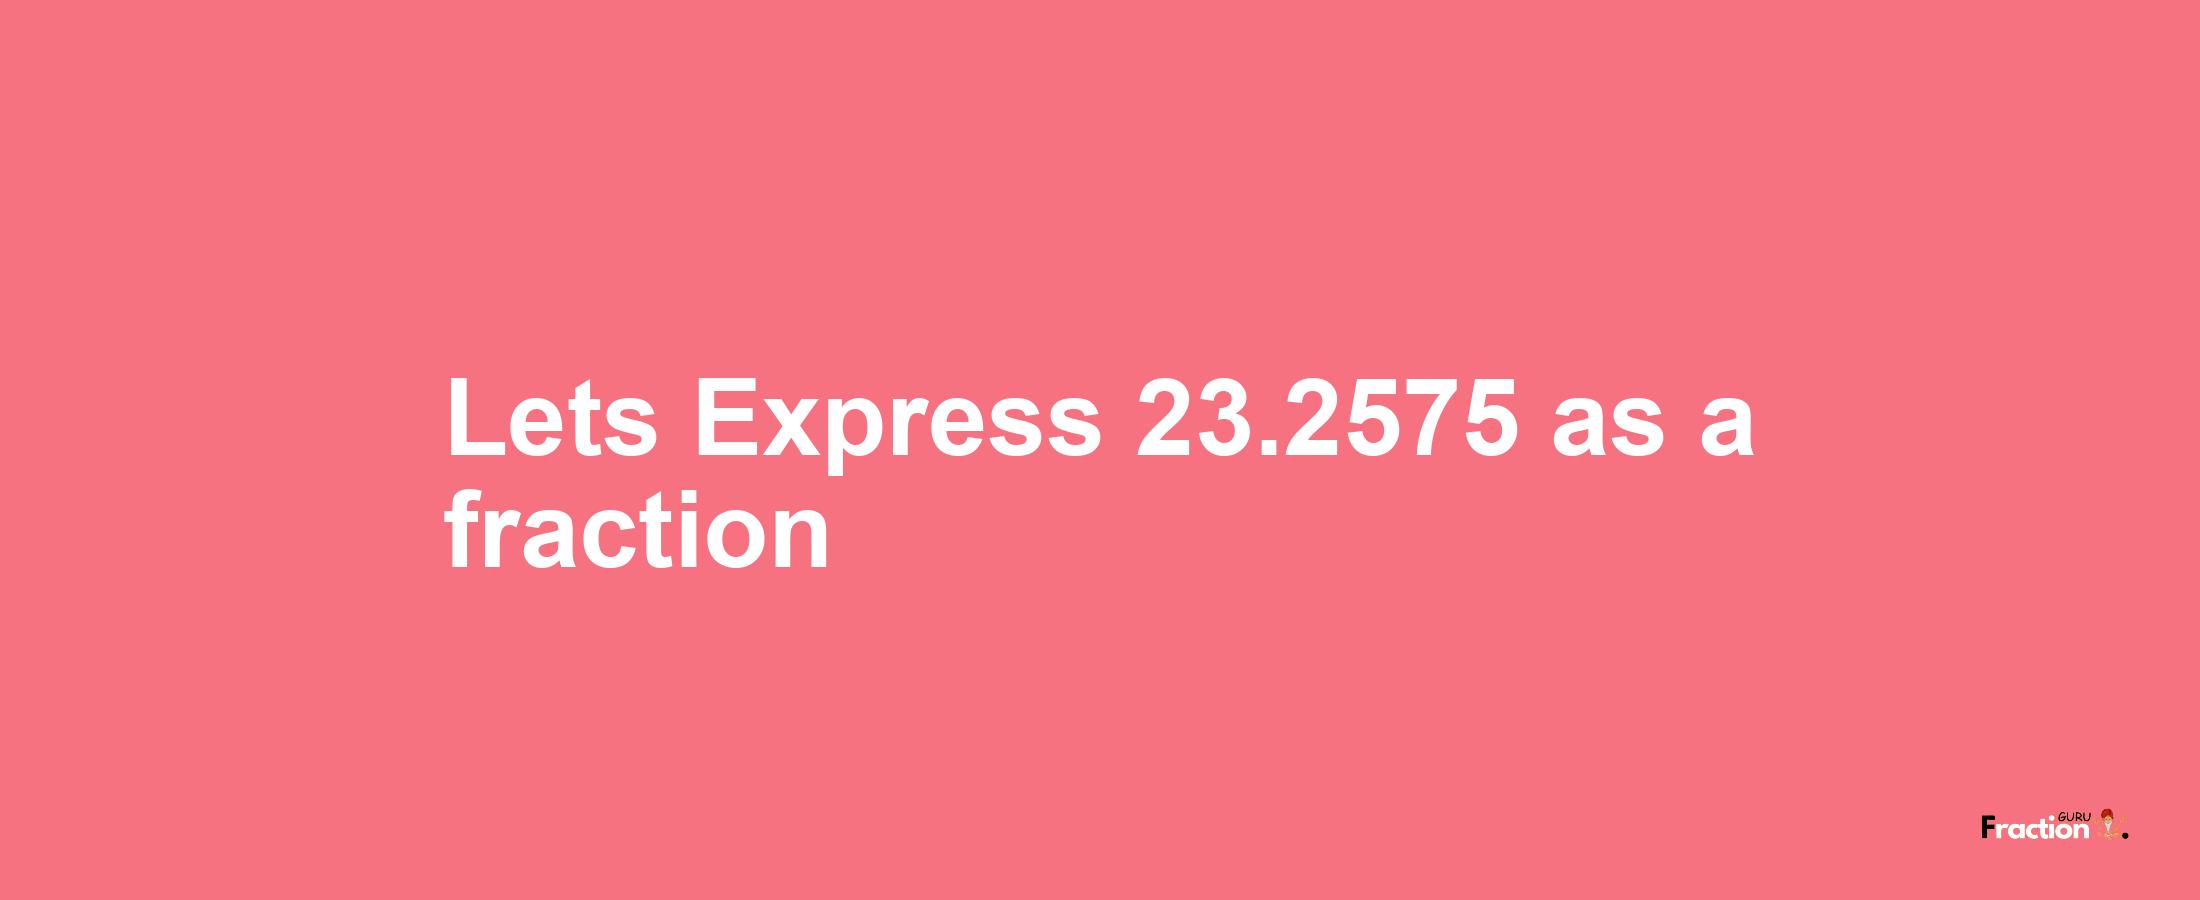 Lets Express 23.2575 as afraction